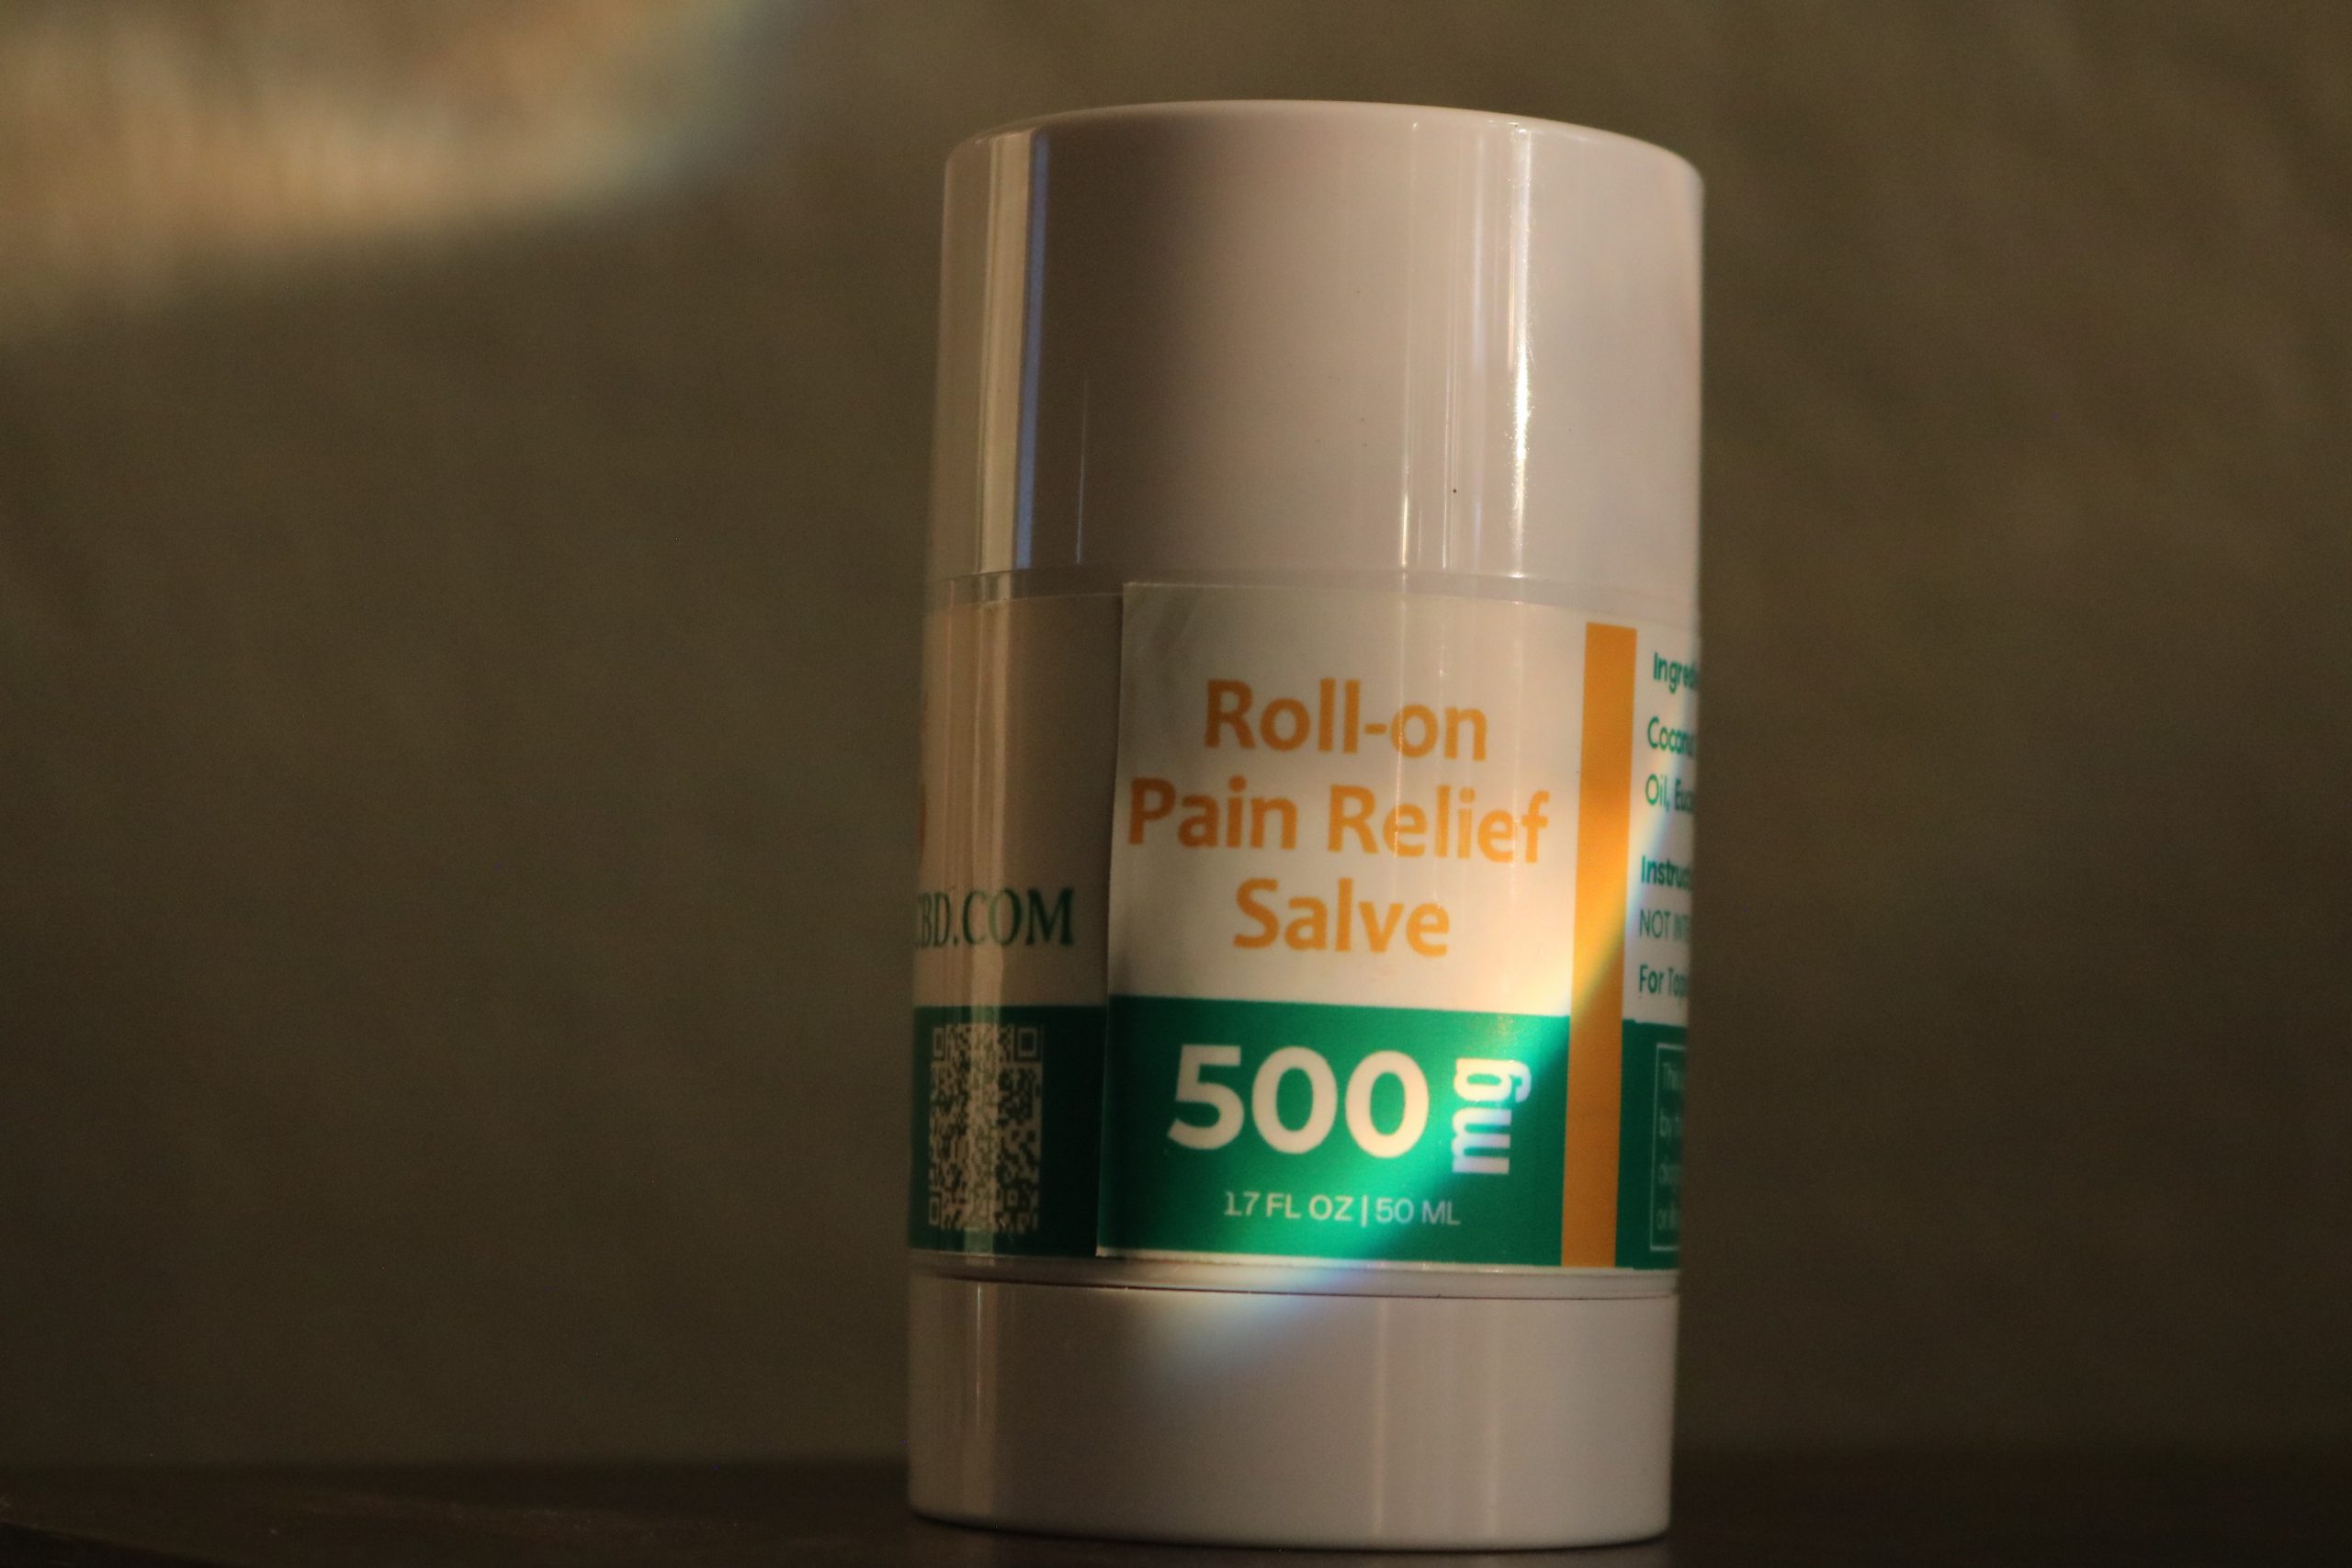 Roll-on Pain Relief Salve – 500 mg